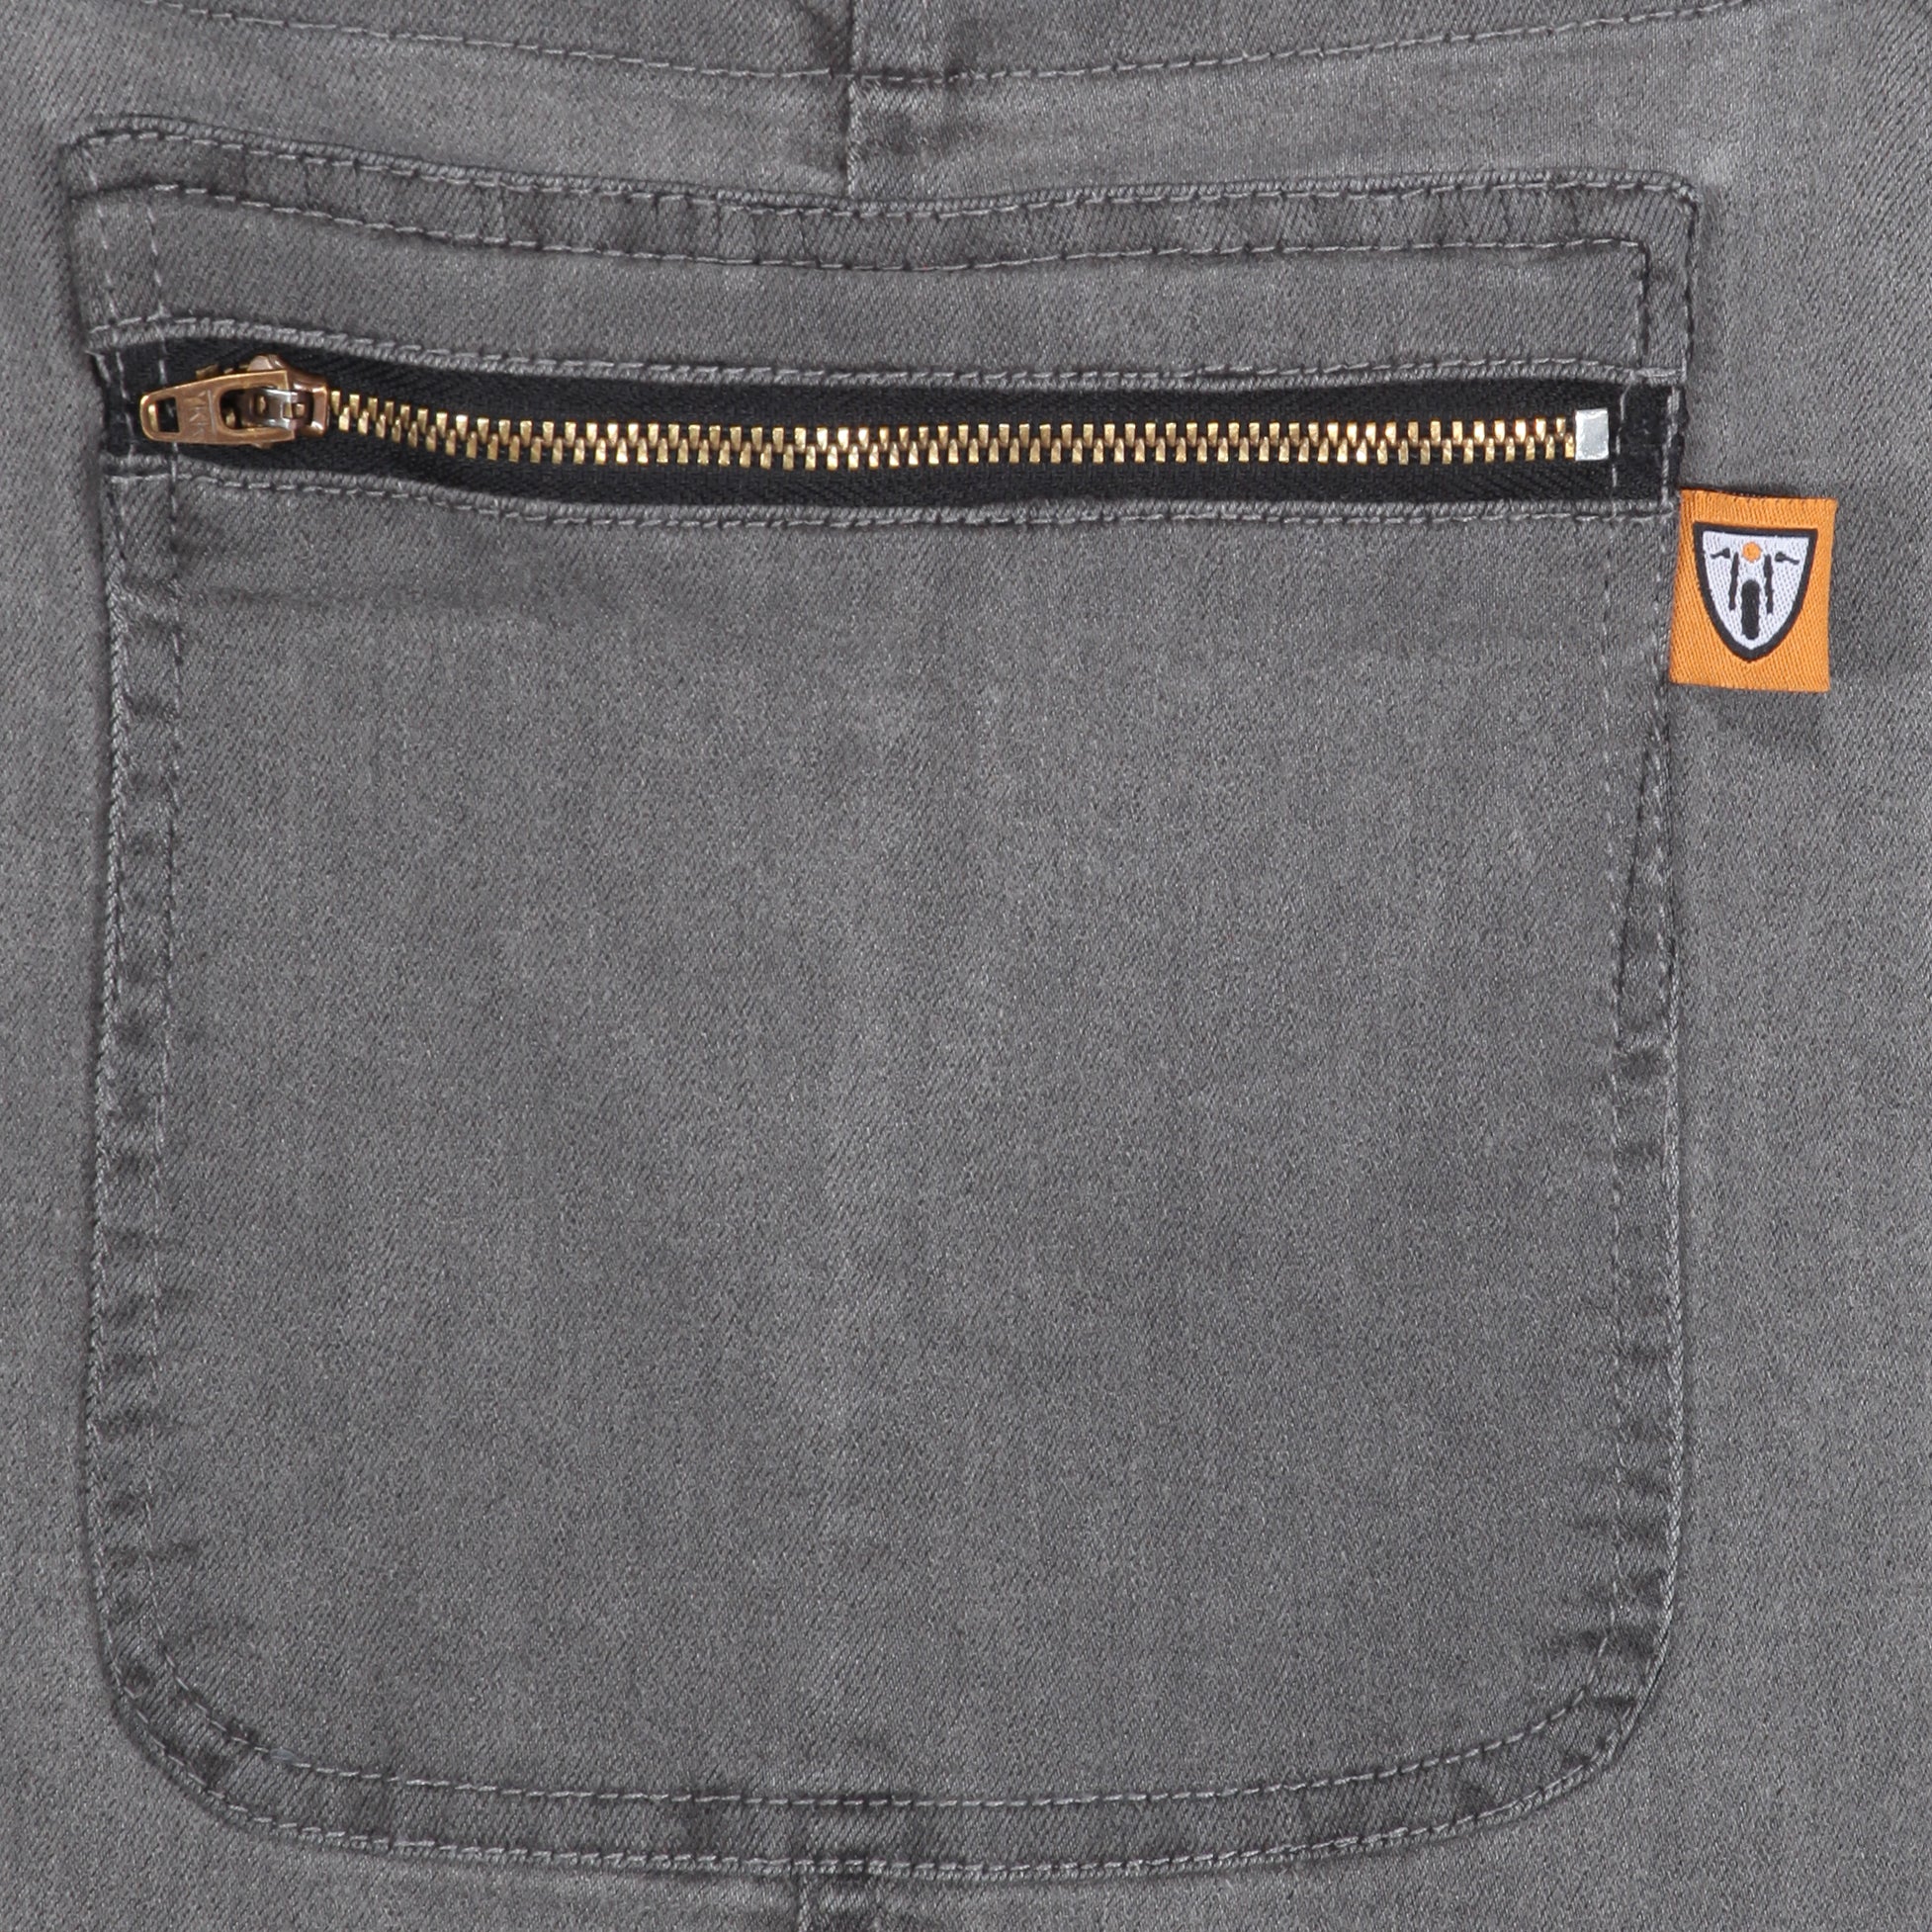 Grey kevlar motorcycle overall for women from Motogirl pocket close up